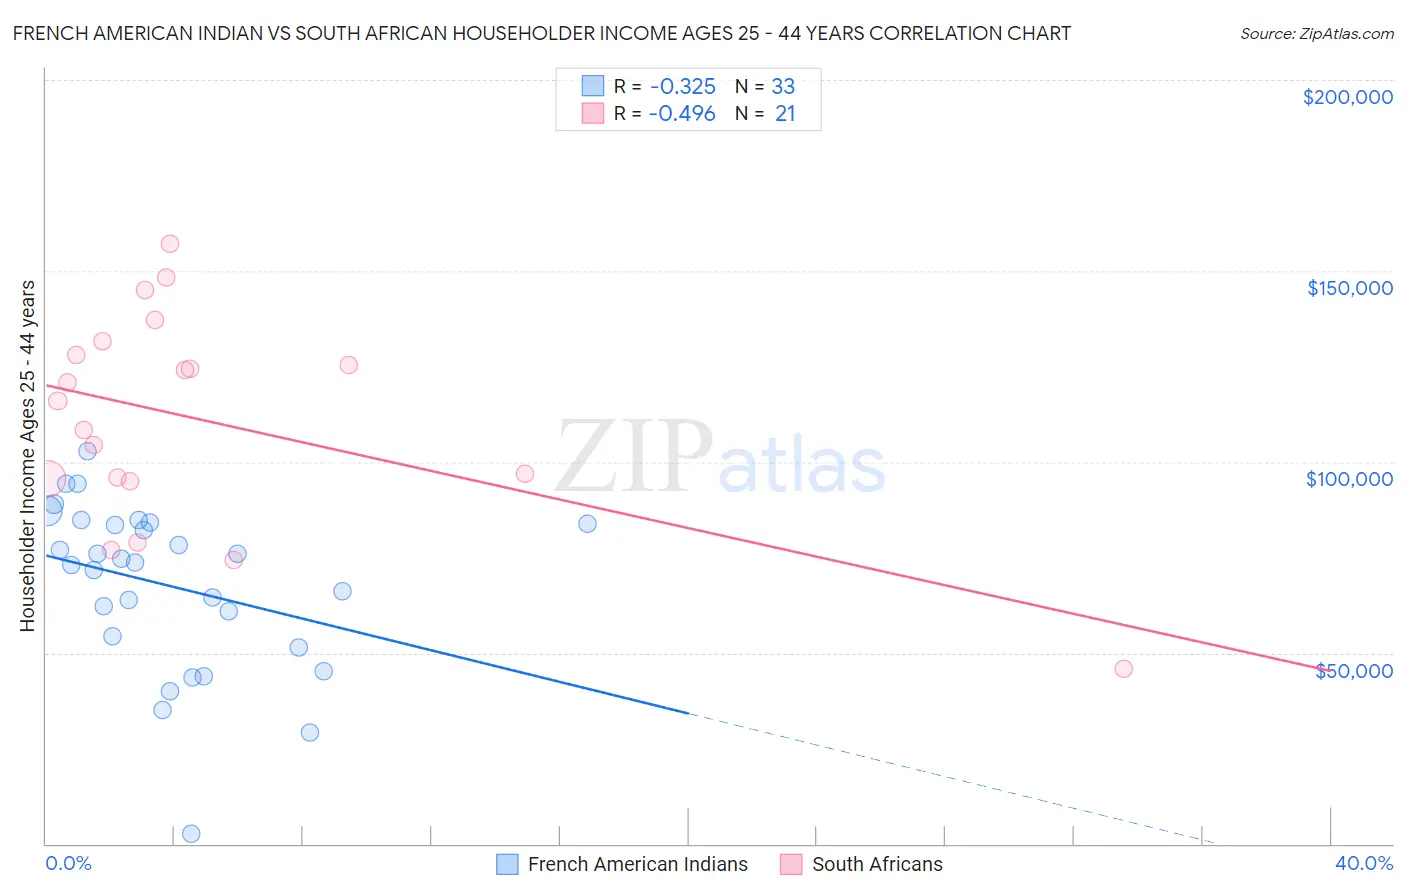 French American Indian vs South African Householder Income Ages 25 - 44 years